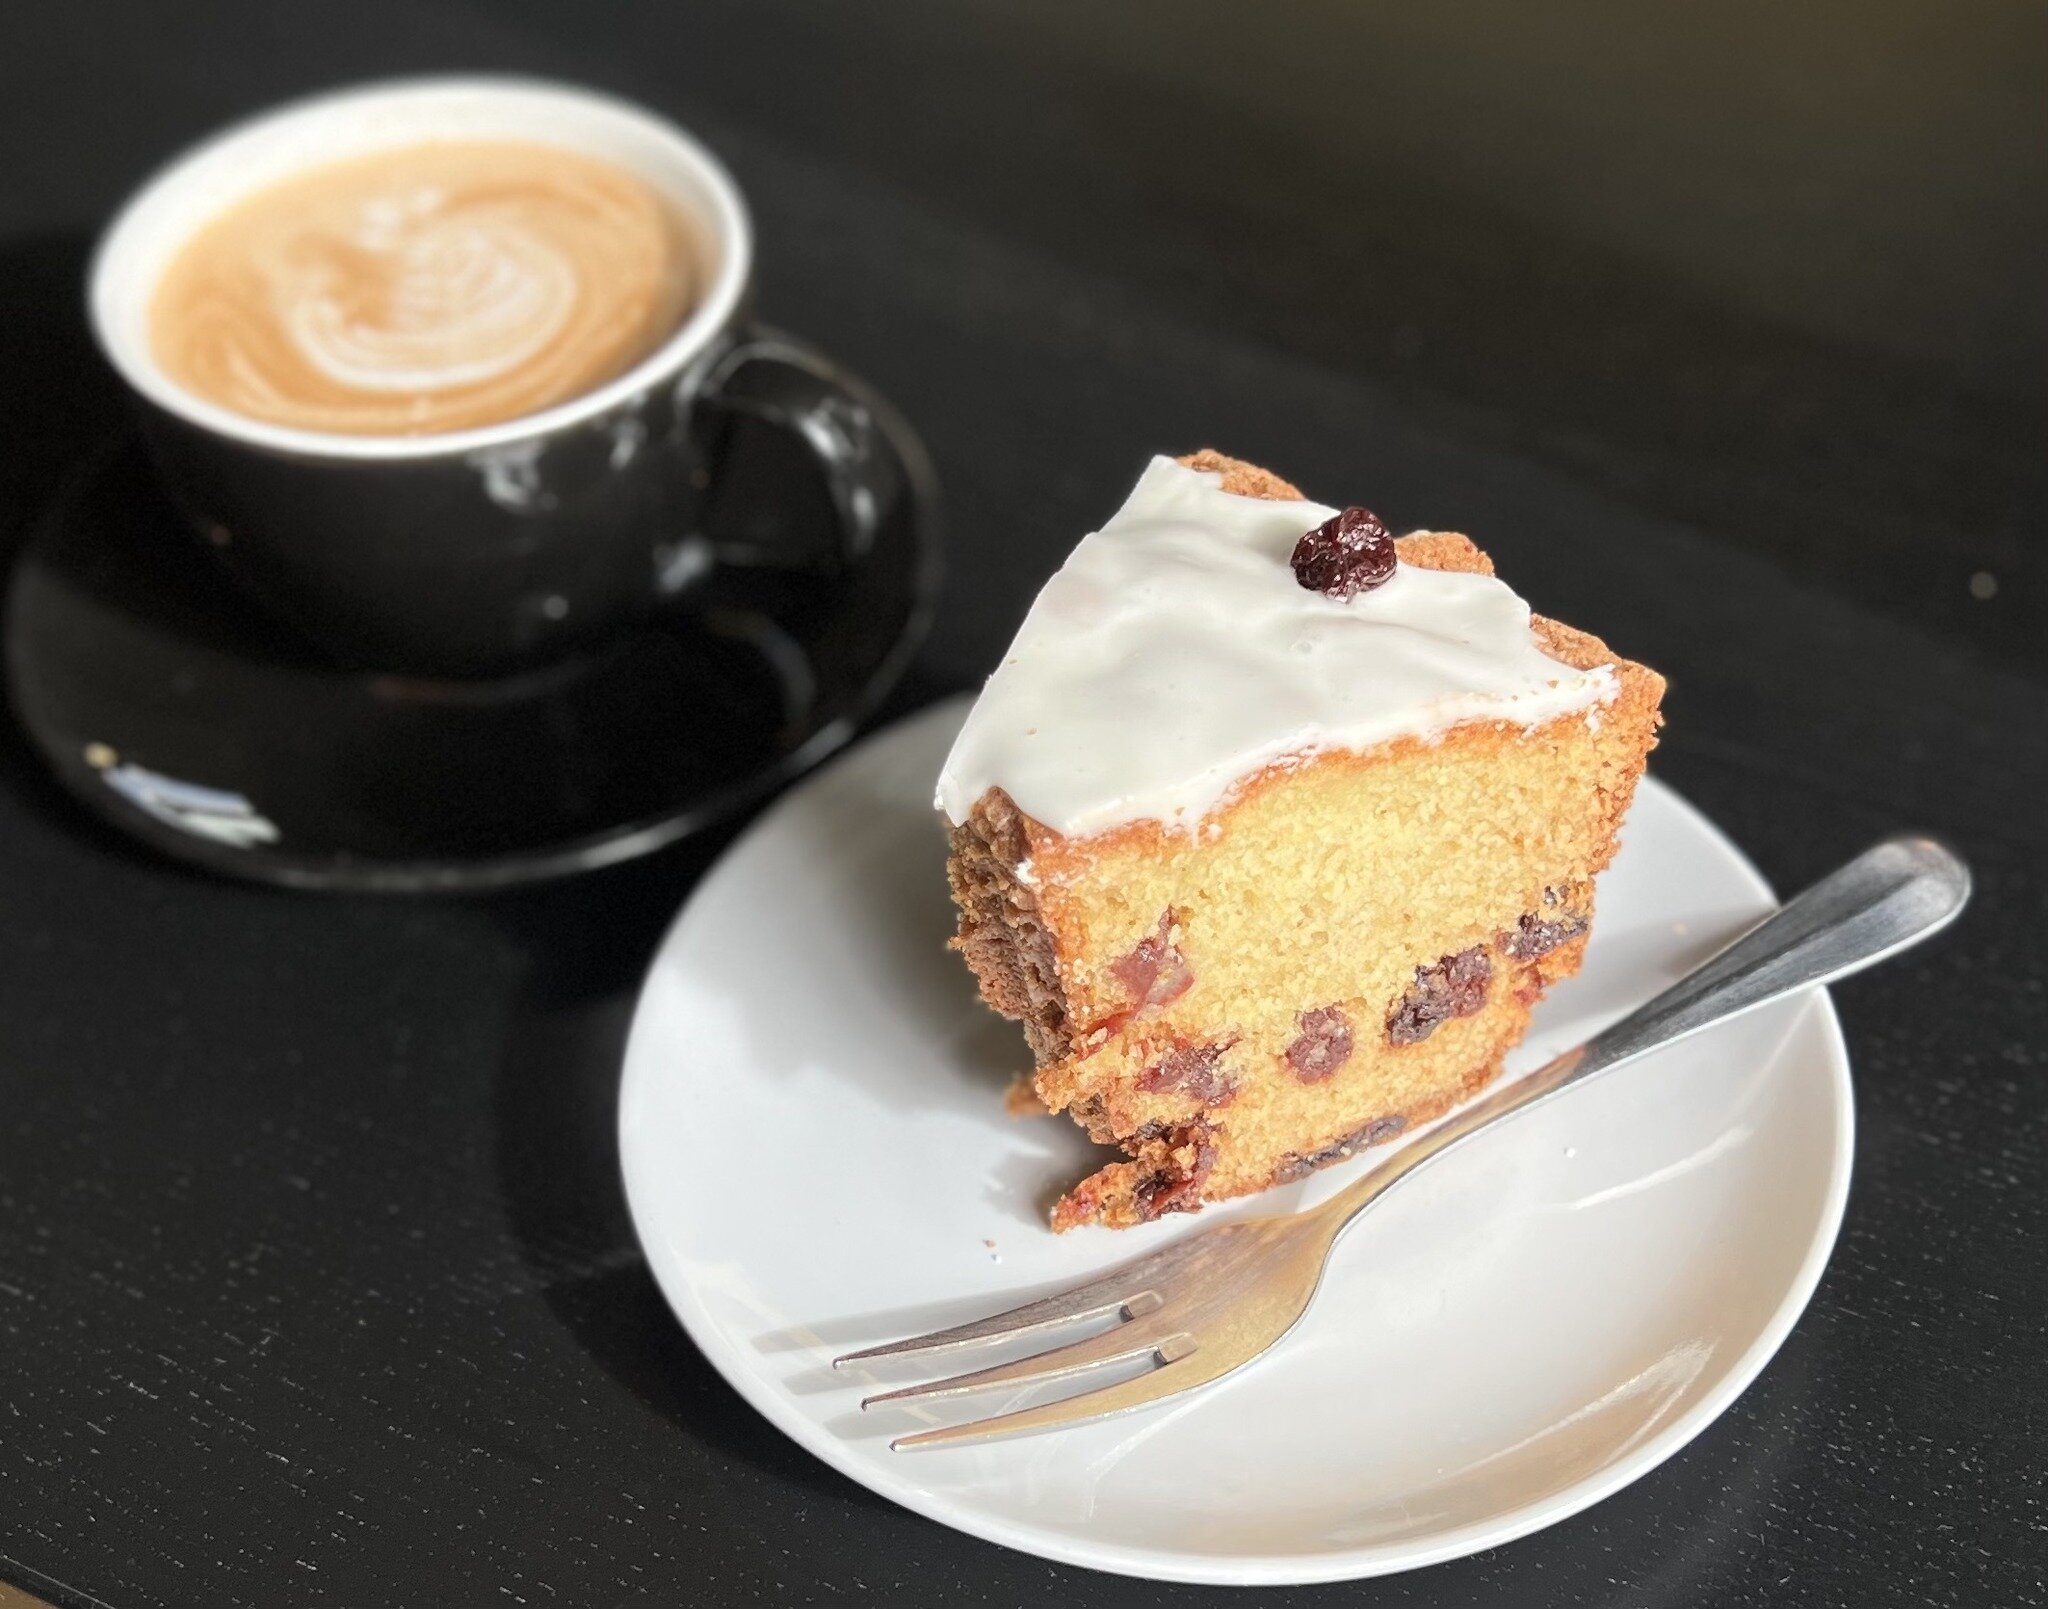 Oh yum, do we have a special treat for you this weekend. A generous portion of Macrina Lemon Sour Cherry Coffee Cake. 

Morning, mid-morning, noon and afternoon. It's good any time! Stop by for a slice. 
.
.
.
 #rentonhighlands #rentonwa #afternoonco